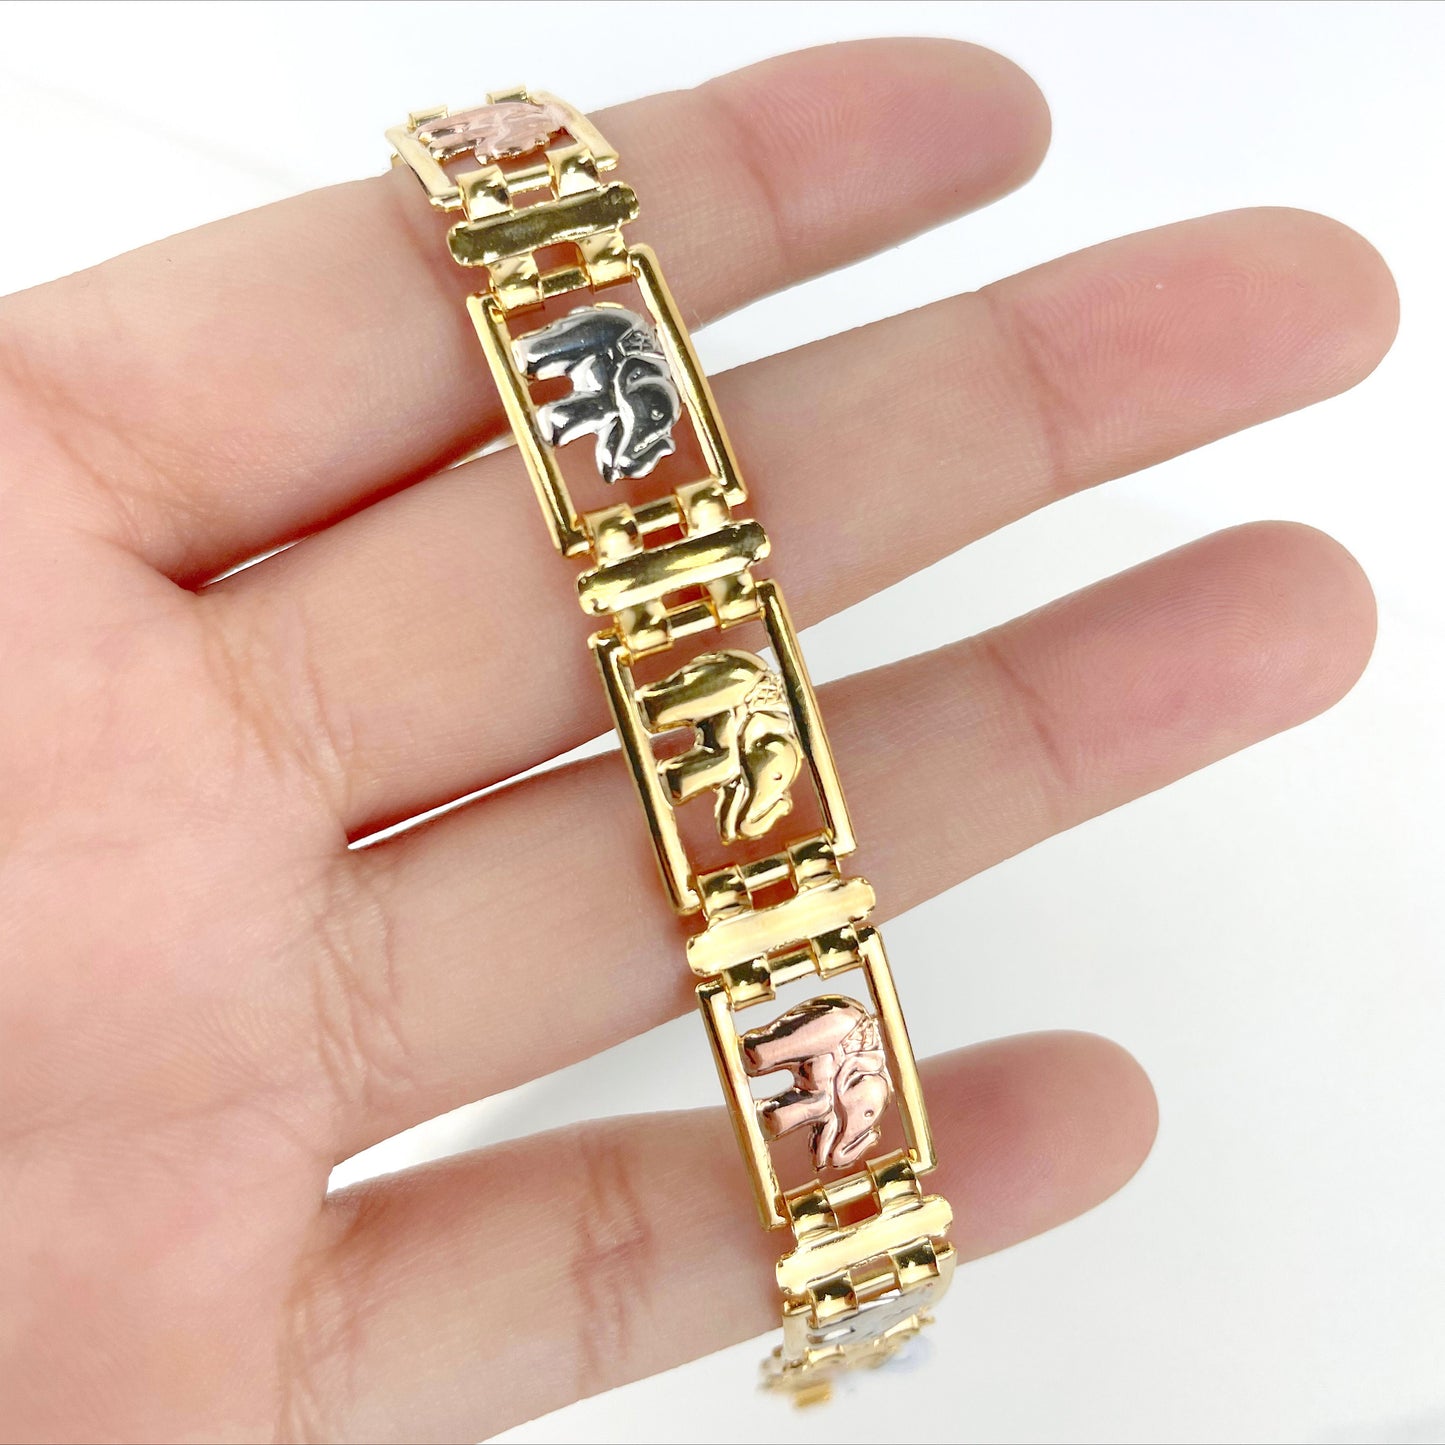 18k Gold Filled Three Tone Linked Elephants Bracelet, Lucky & Protection, Wholesale Jewelry Making Supplies